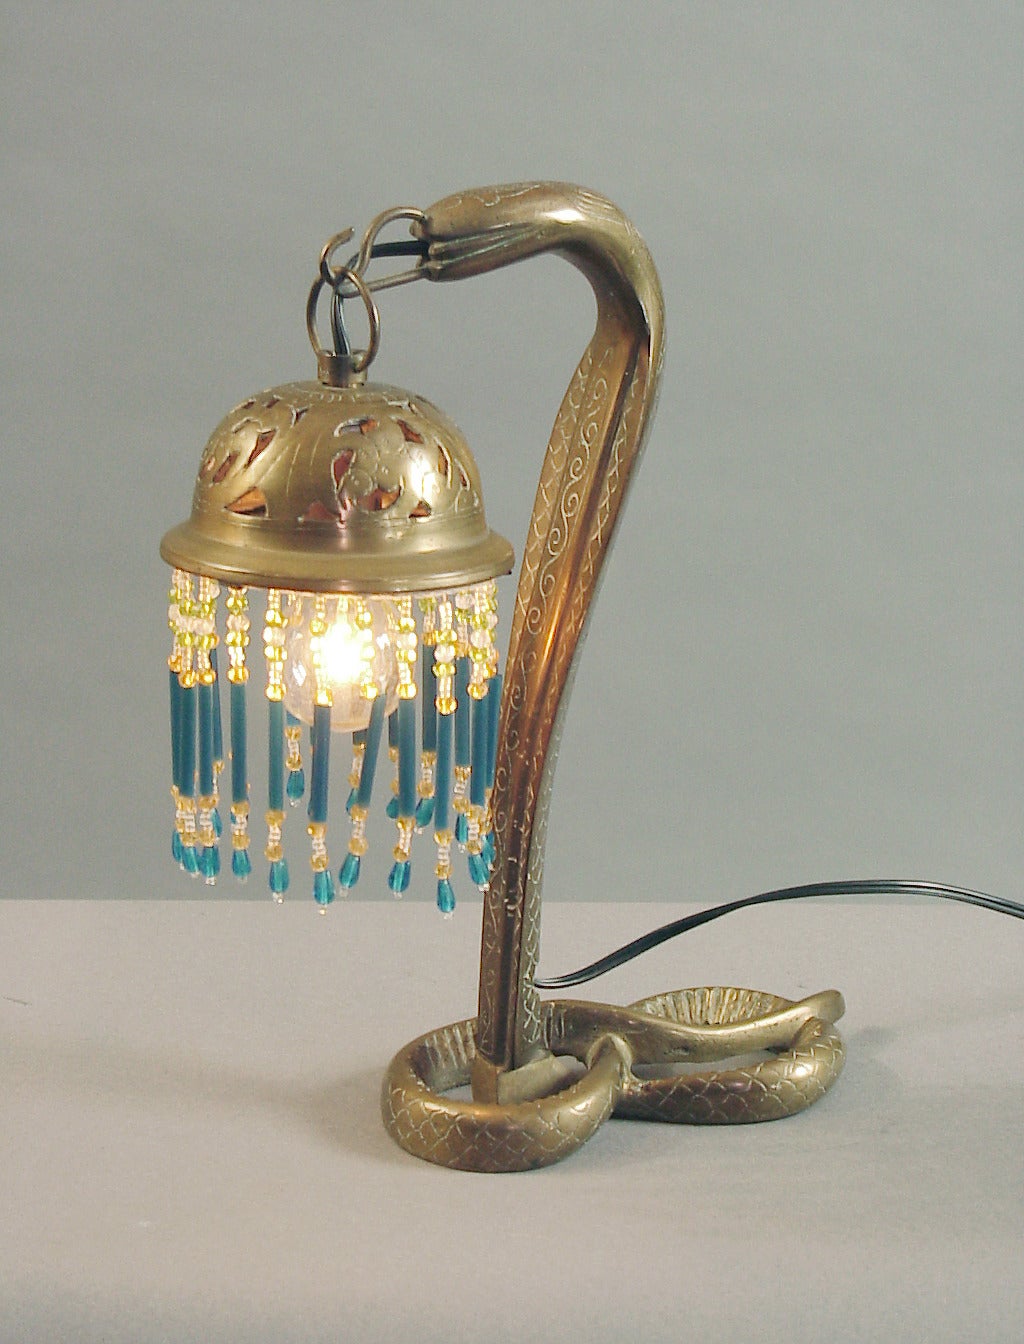 Syrians made a full compliment of brass lamps which were decorated by hand and ornamented with glass beaded shades, and sold all over the world. Over the years I've had table lamps and floor lamps; they're always beautifully designed and executed,